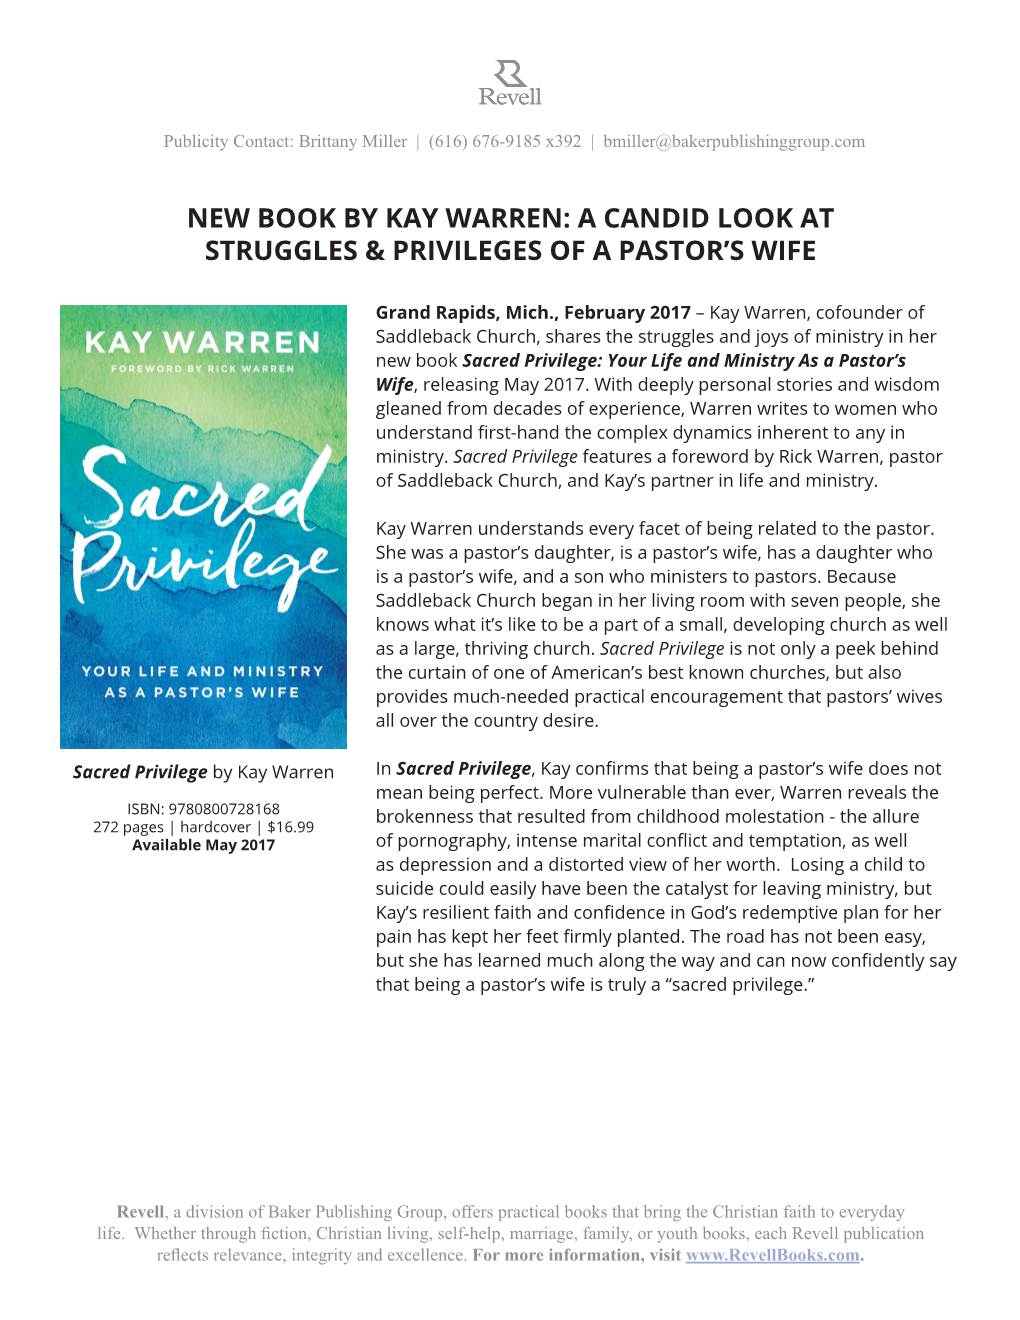 New Book by Kay Warren: a Candid Look at Struggles & Privileges of a Pastor’S Wife